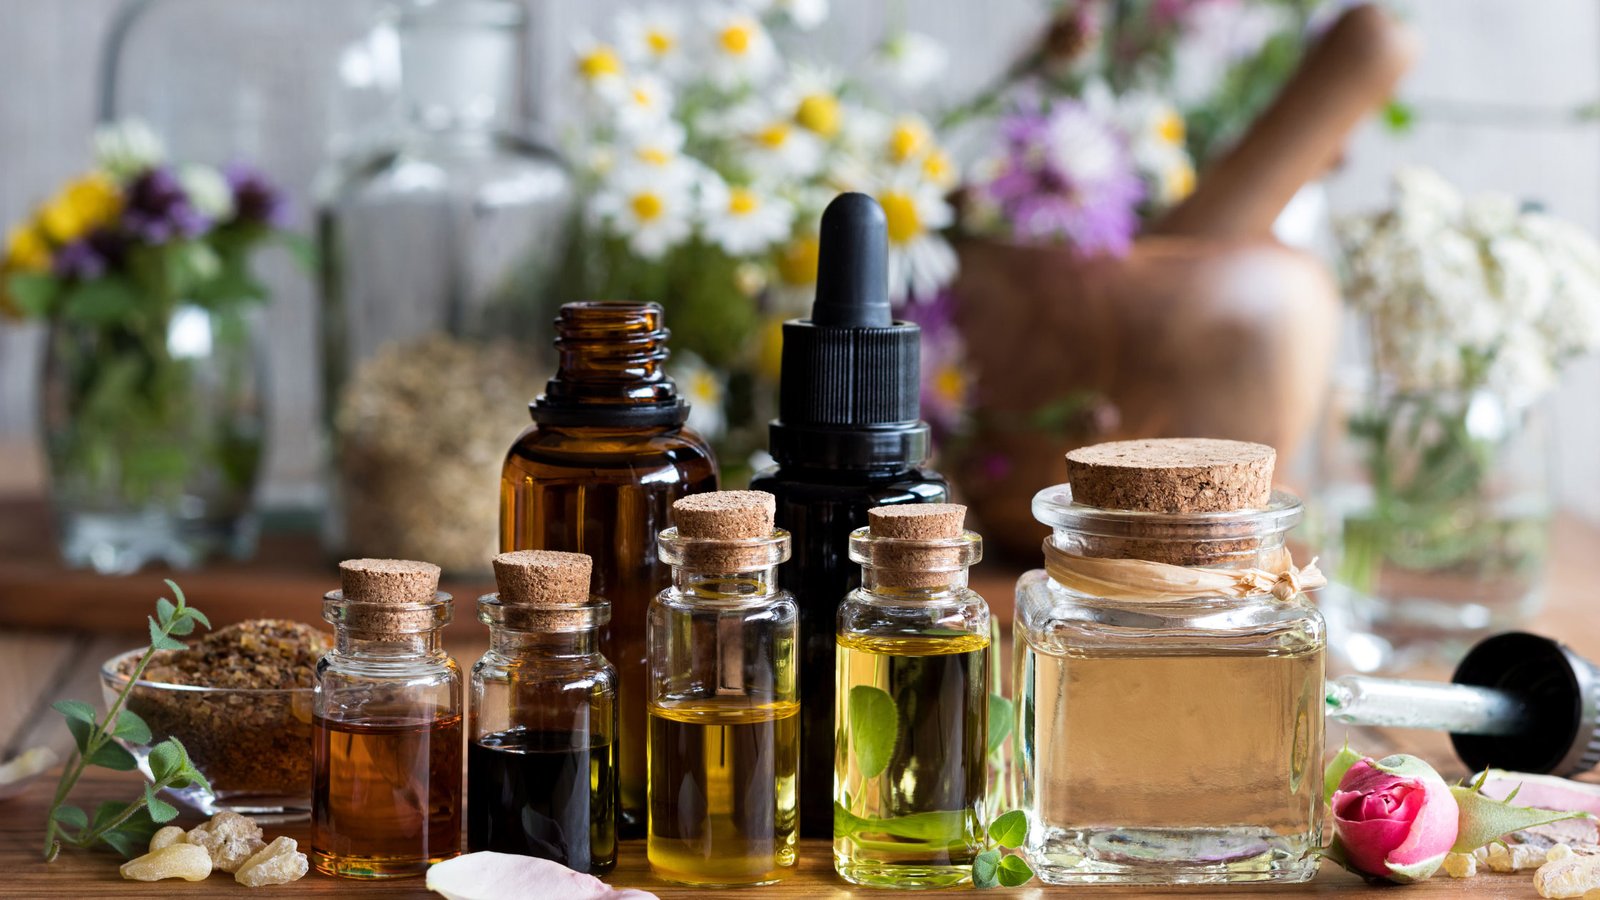 Different essential oils in a bottle, herbs and flowers